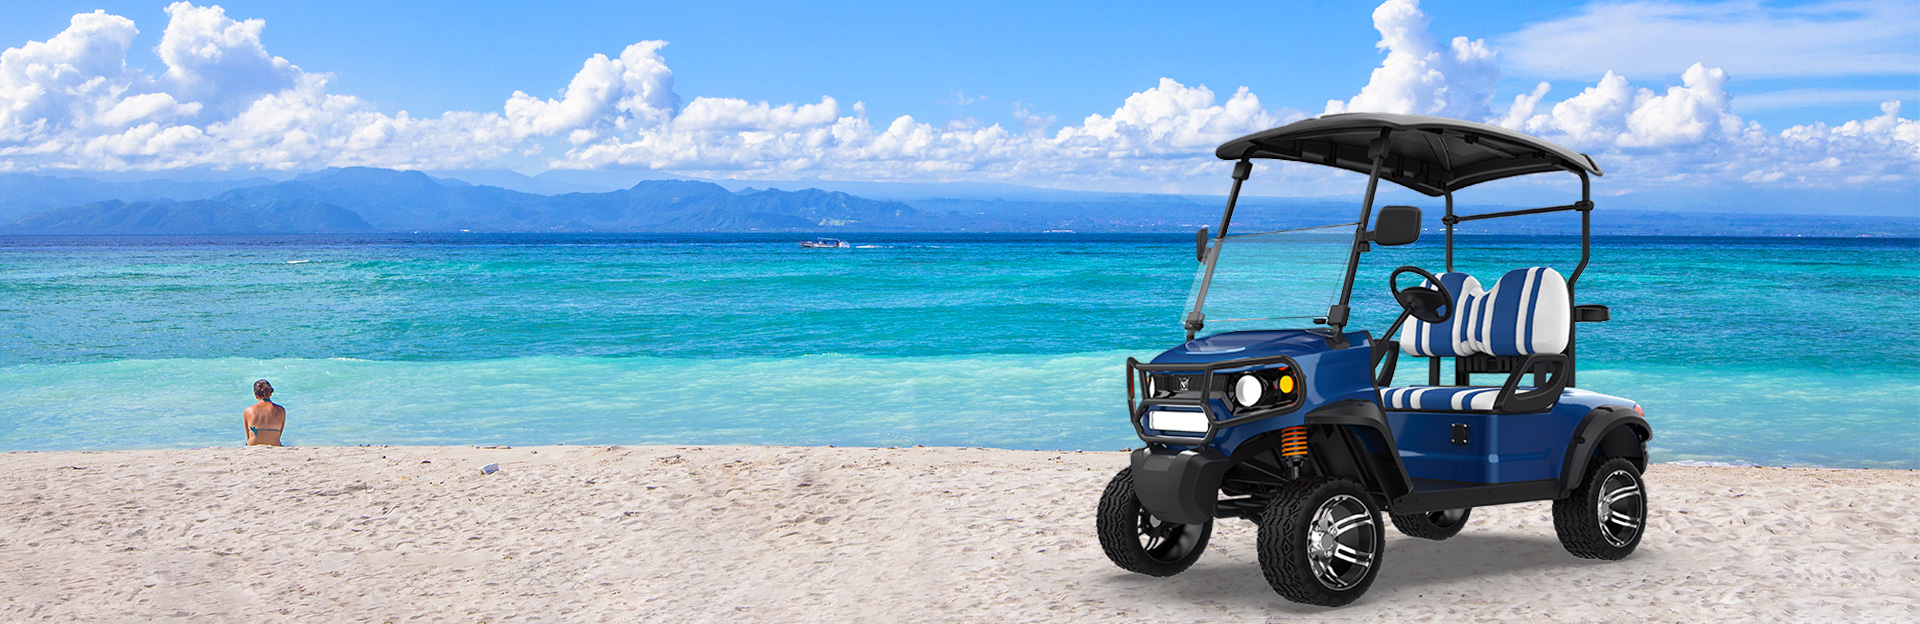 Kinghike Golf Cart: Elevate Your Golfing Experience with Luxury and Performance